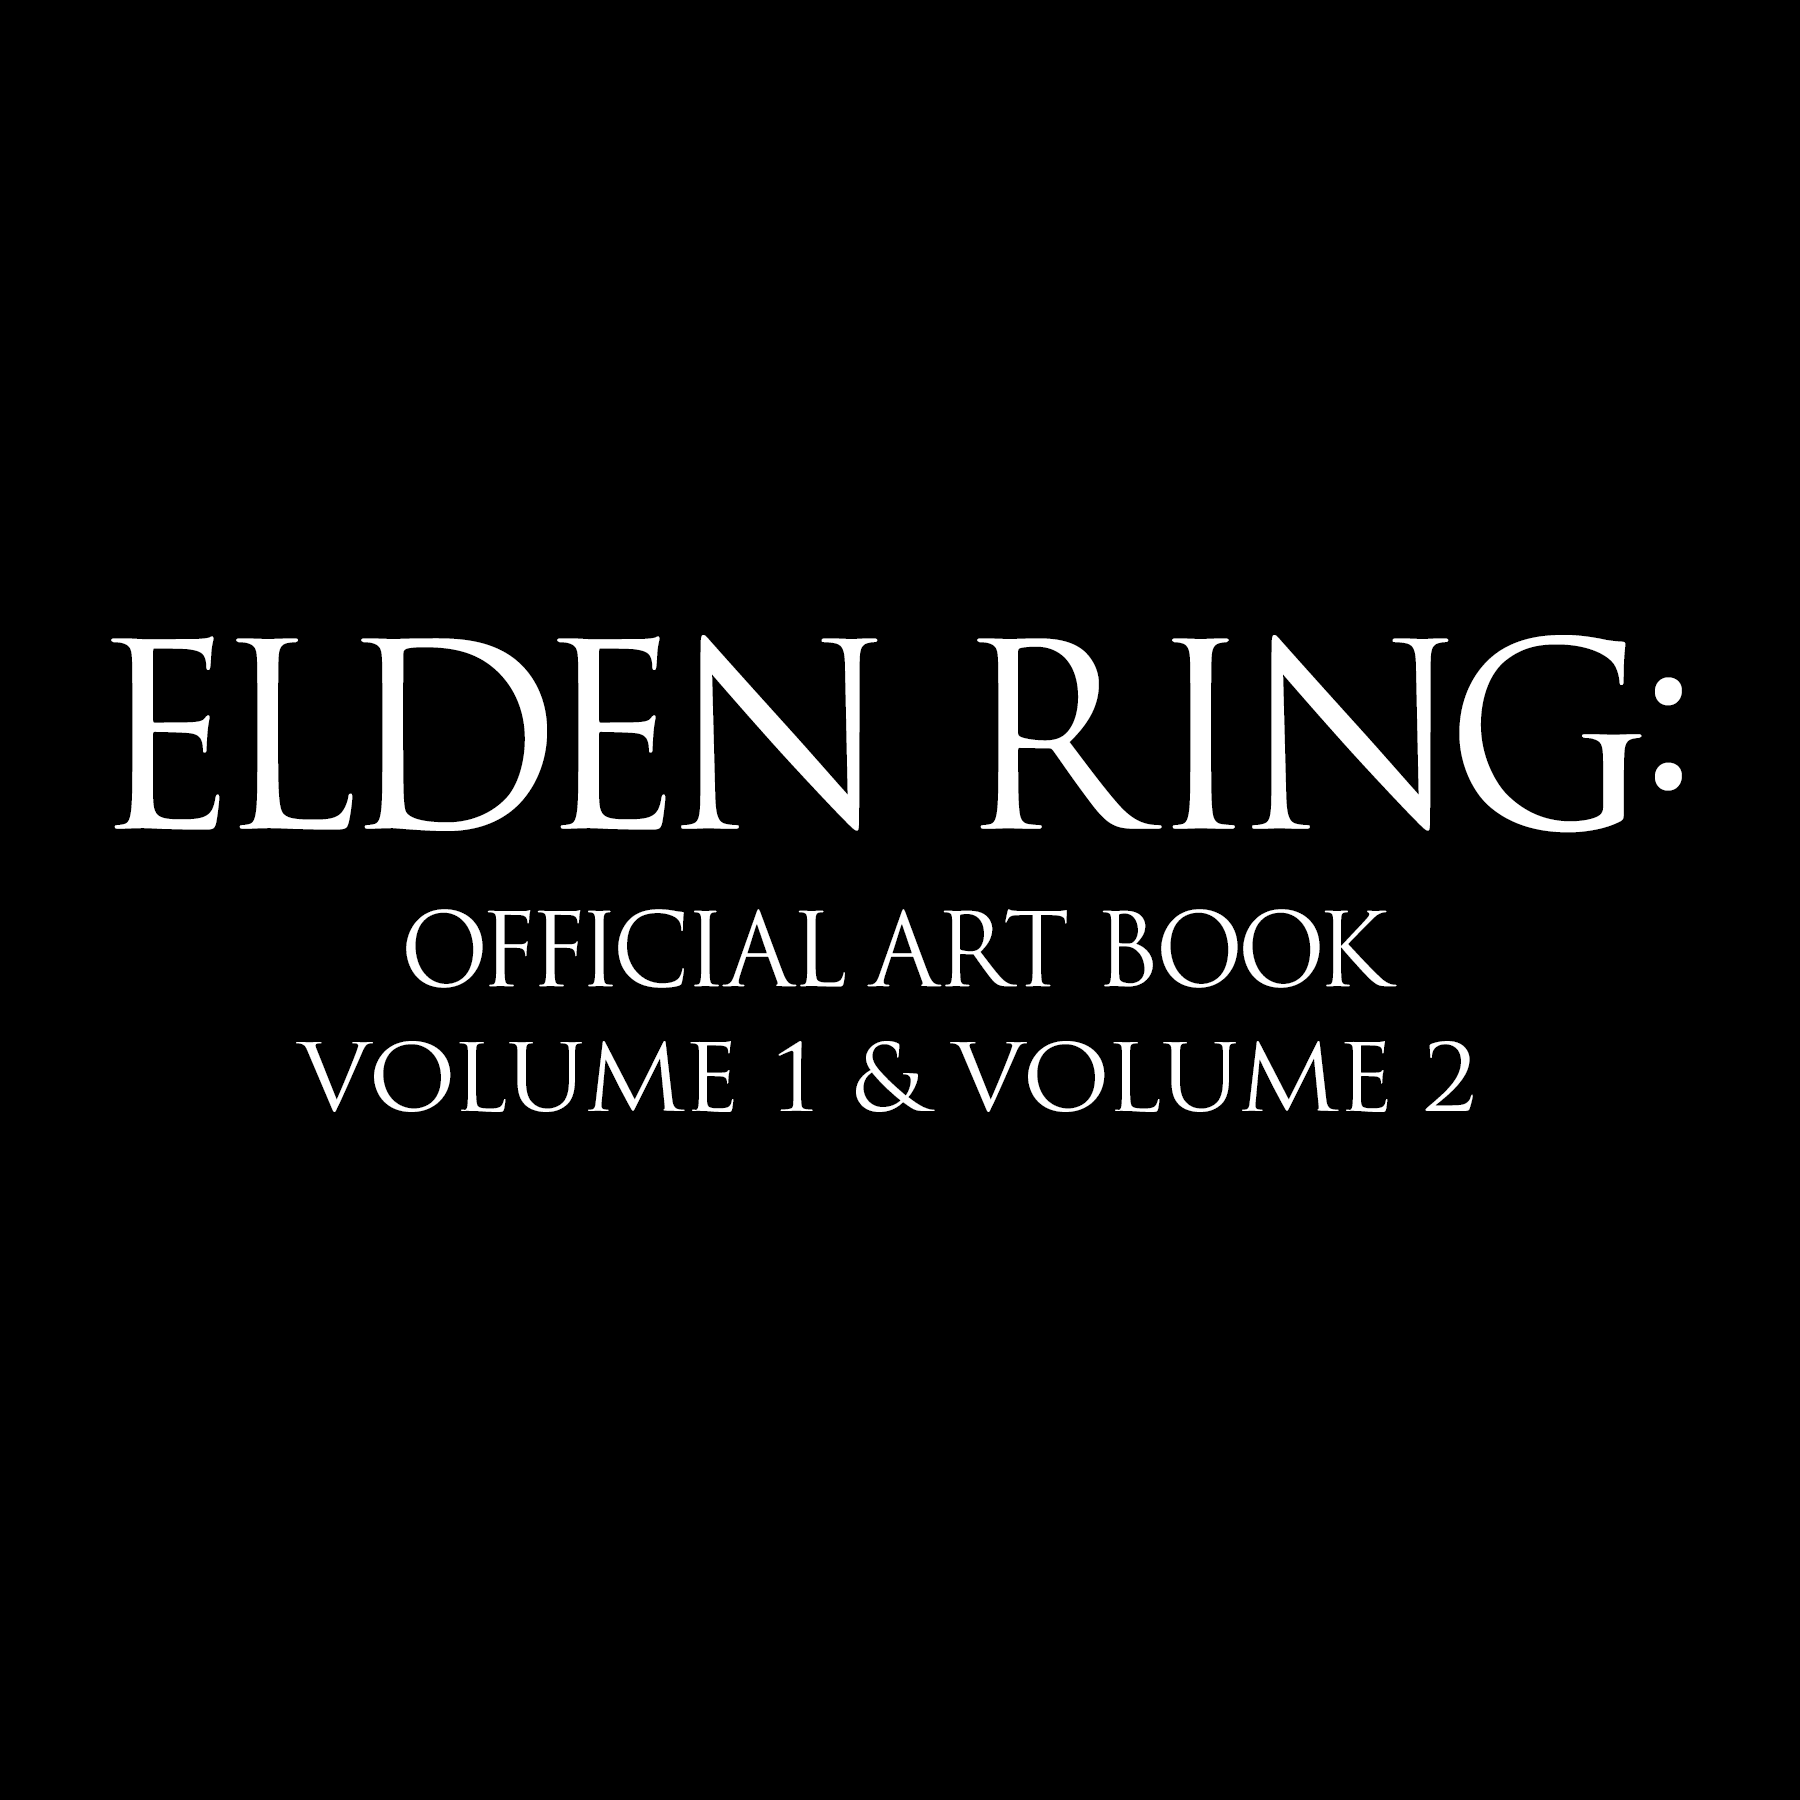 UDON Announces Elden Ring: Official Art Book Volumes 1 & 2 Hardcovers